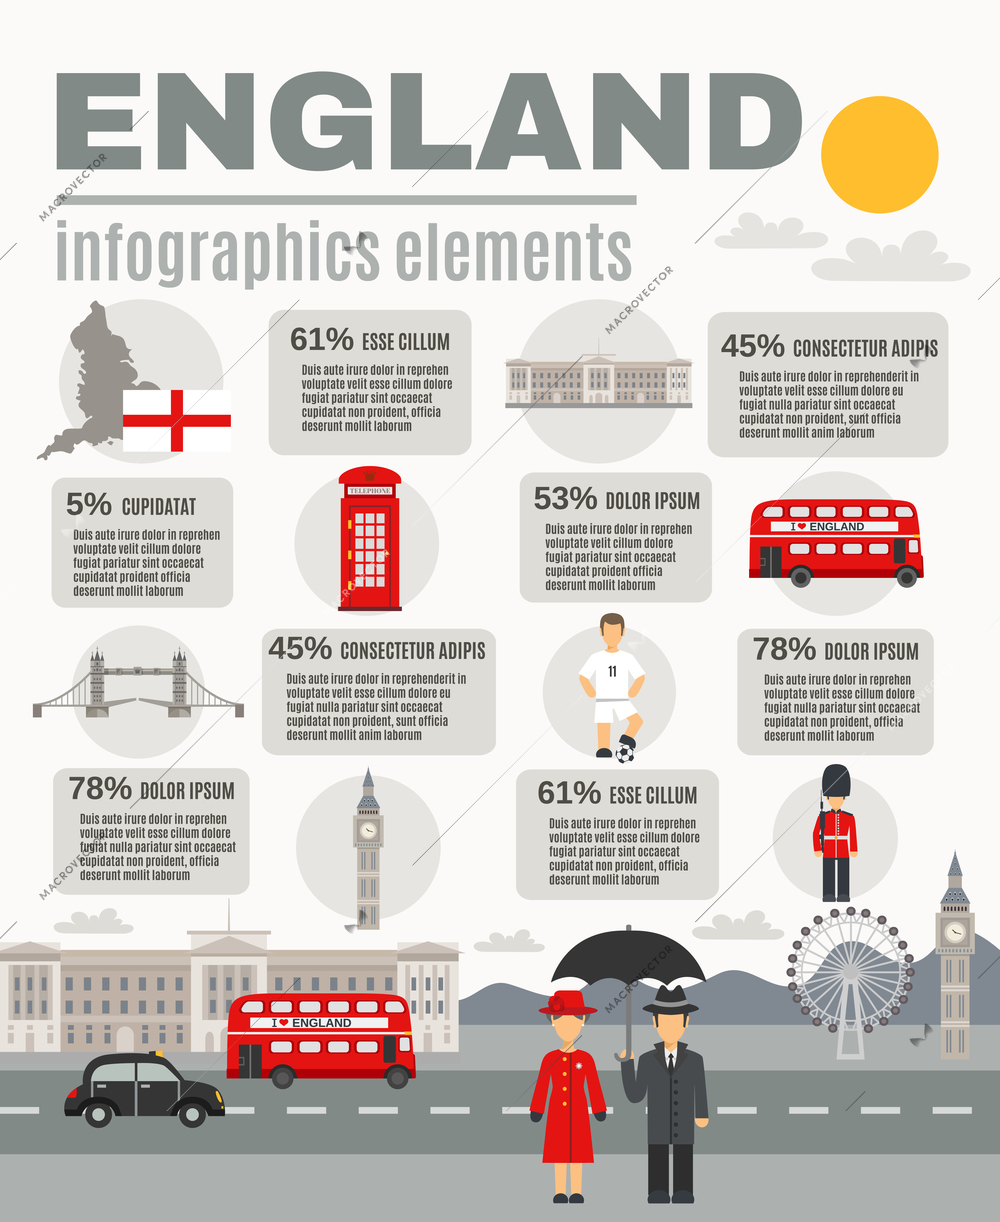 English culture weather traditions sightseeing and tourists attractions information text with infographic elements layout banner print vector illustration